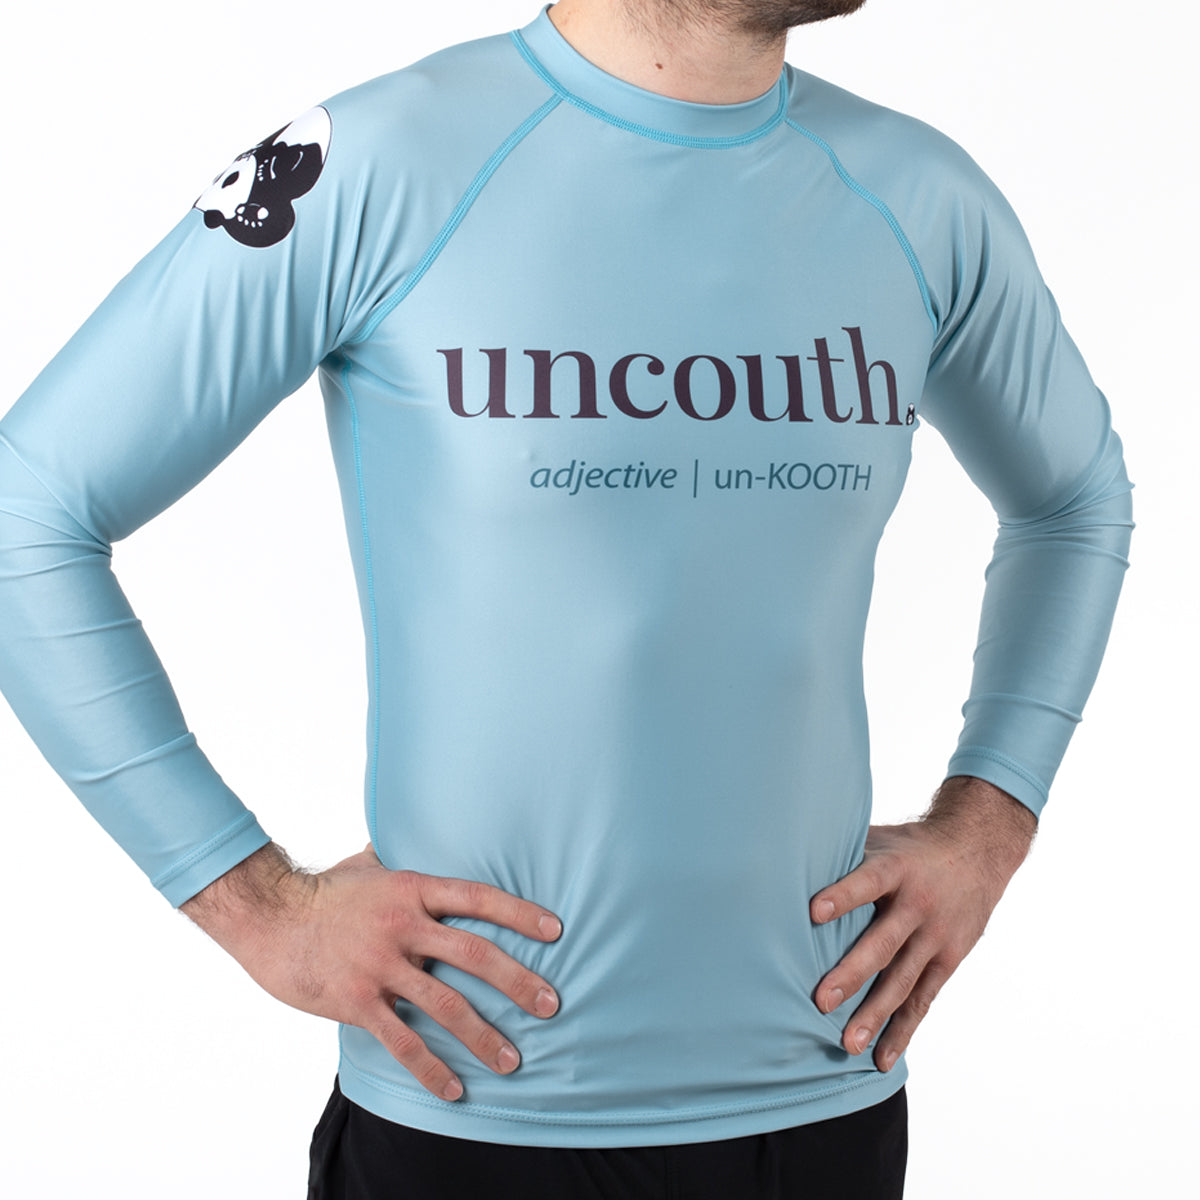 Inverted Gear "Uncouth" Long Sleeve Rash Guard